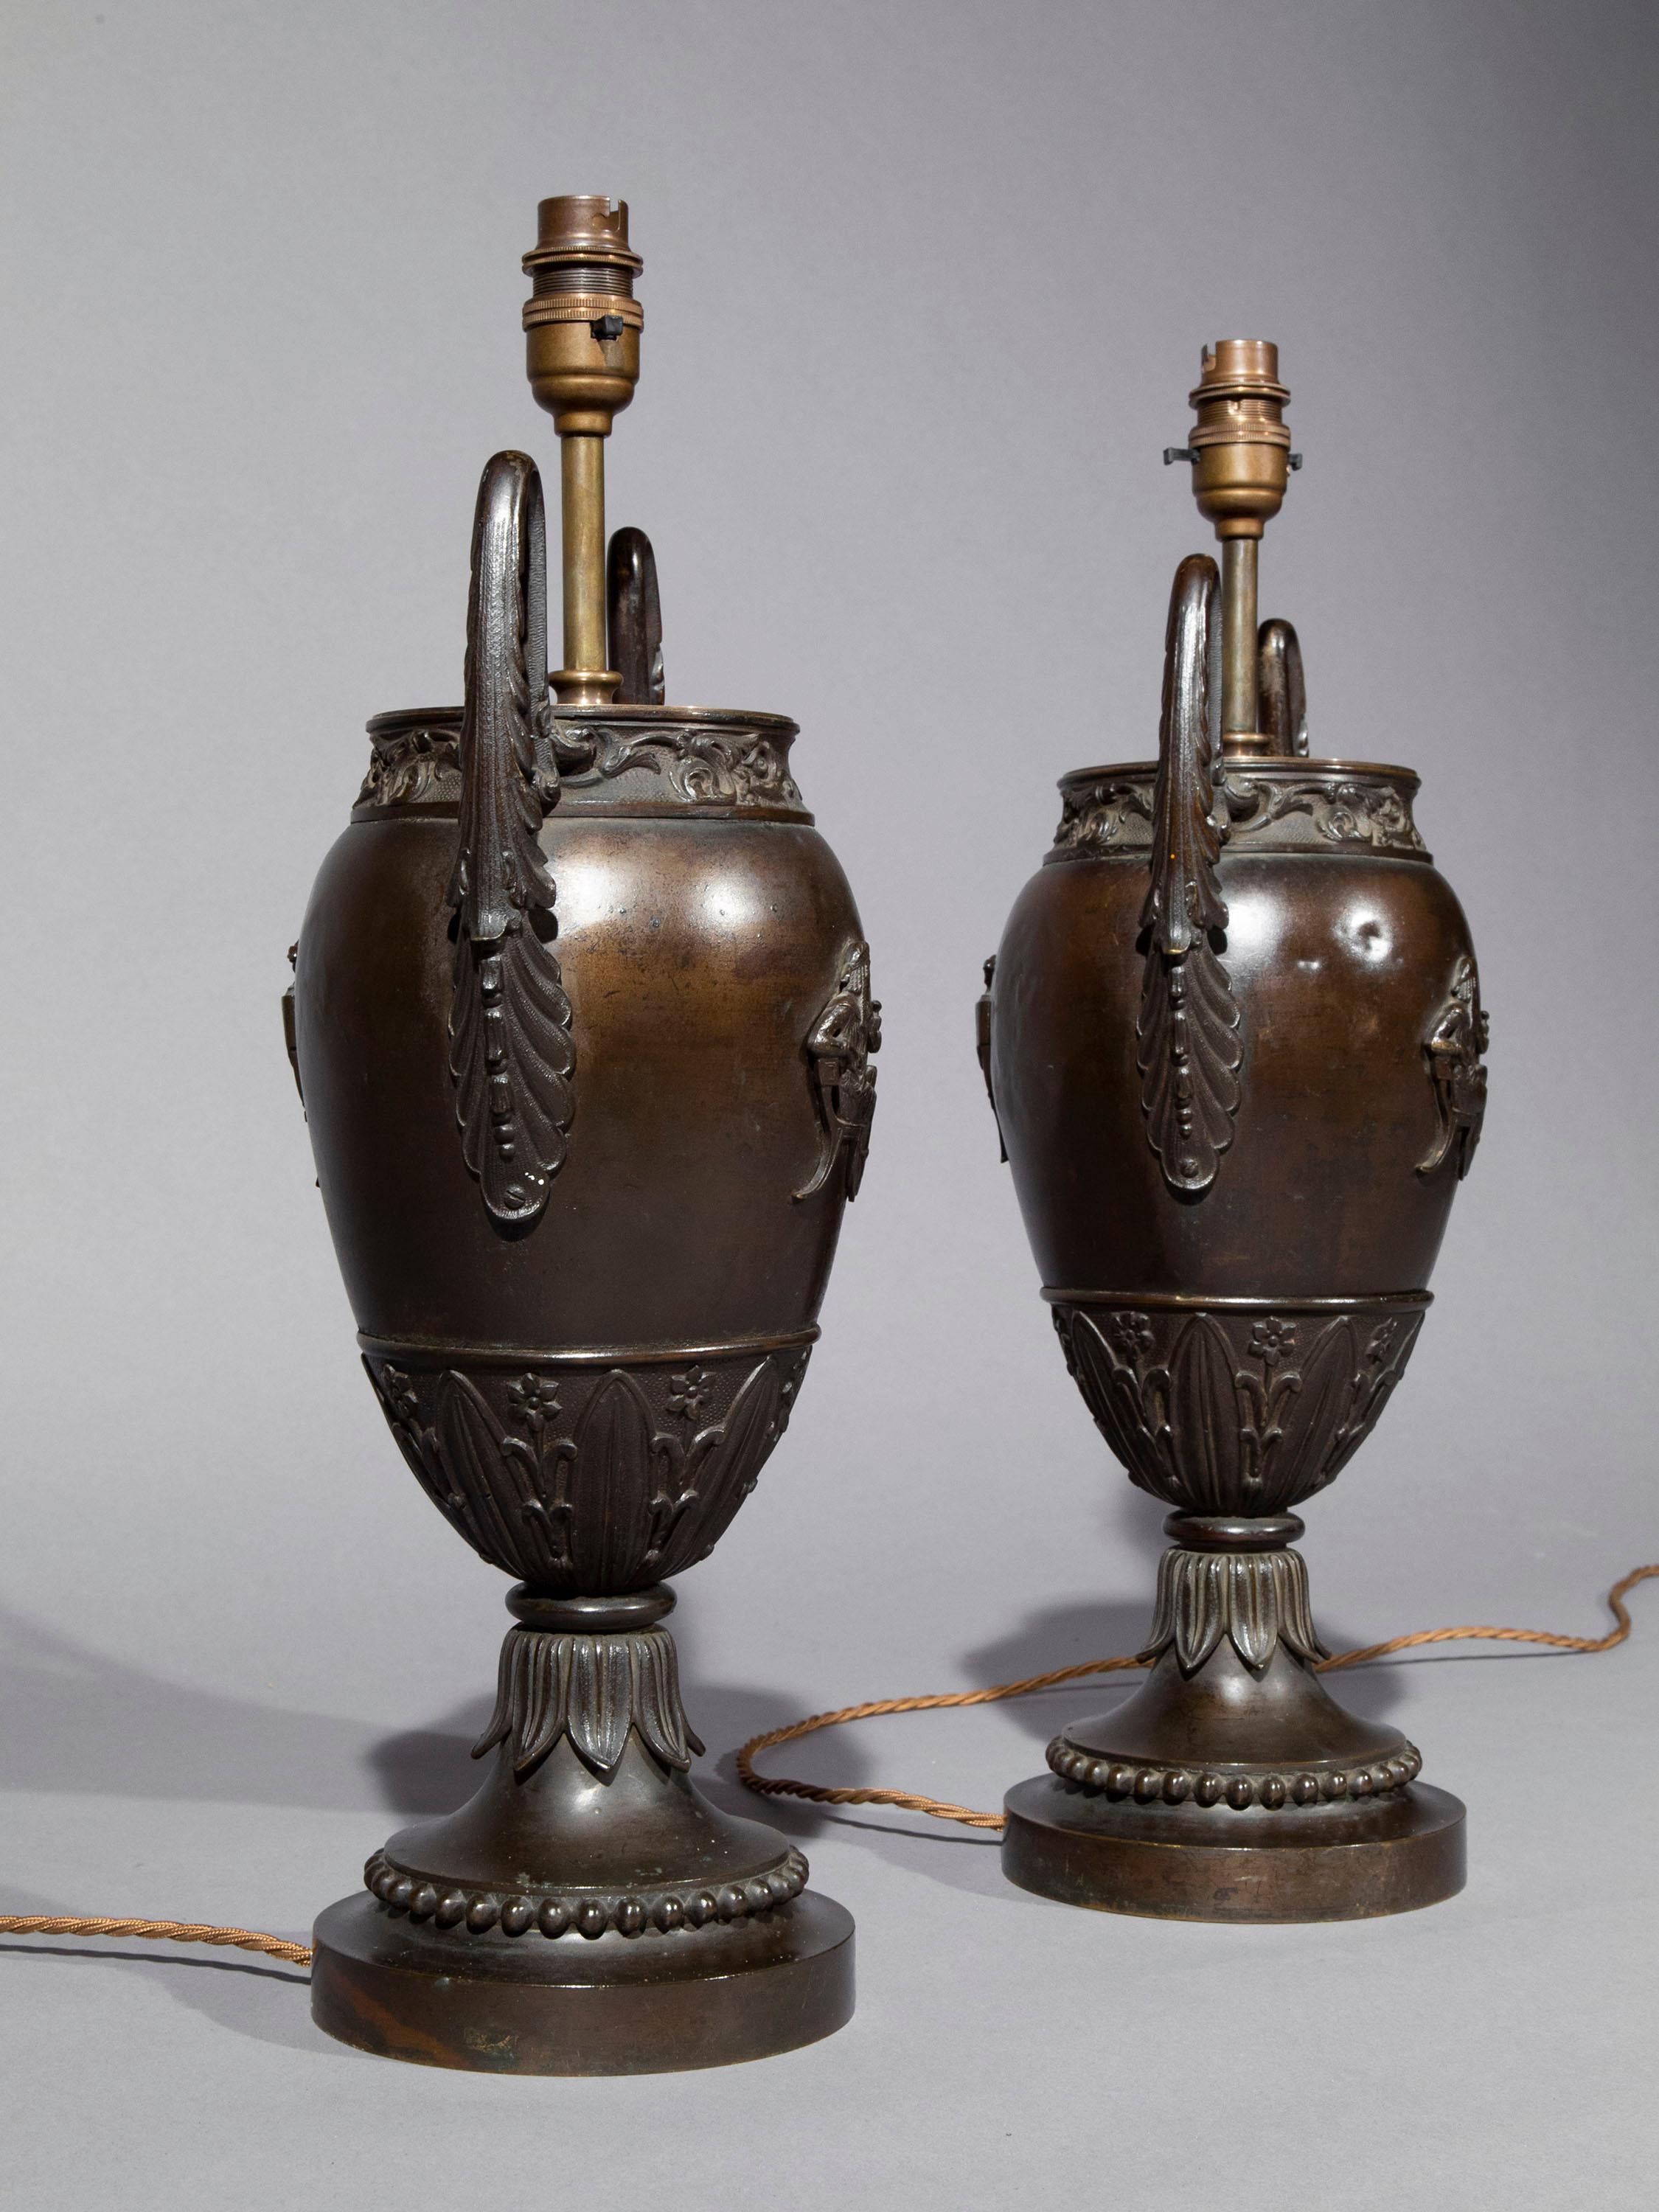 A very decorative pair of fine quality antique patinated urns fitted as table lamps,  
England, early 19th century.

Why we like them
These wonderfully chic lamps are decorated with very fine applied figures of classical Greek youths seated on